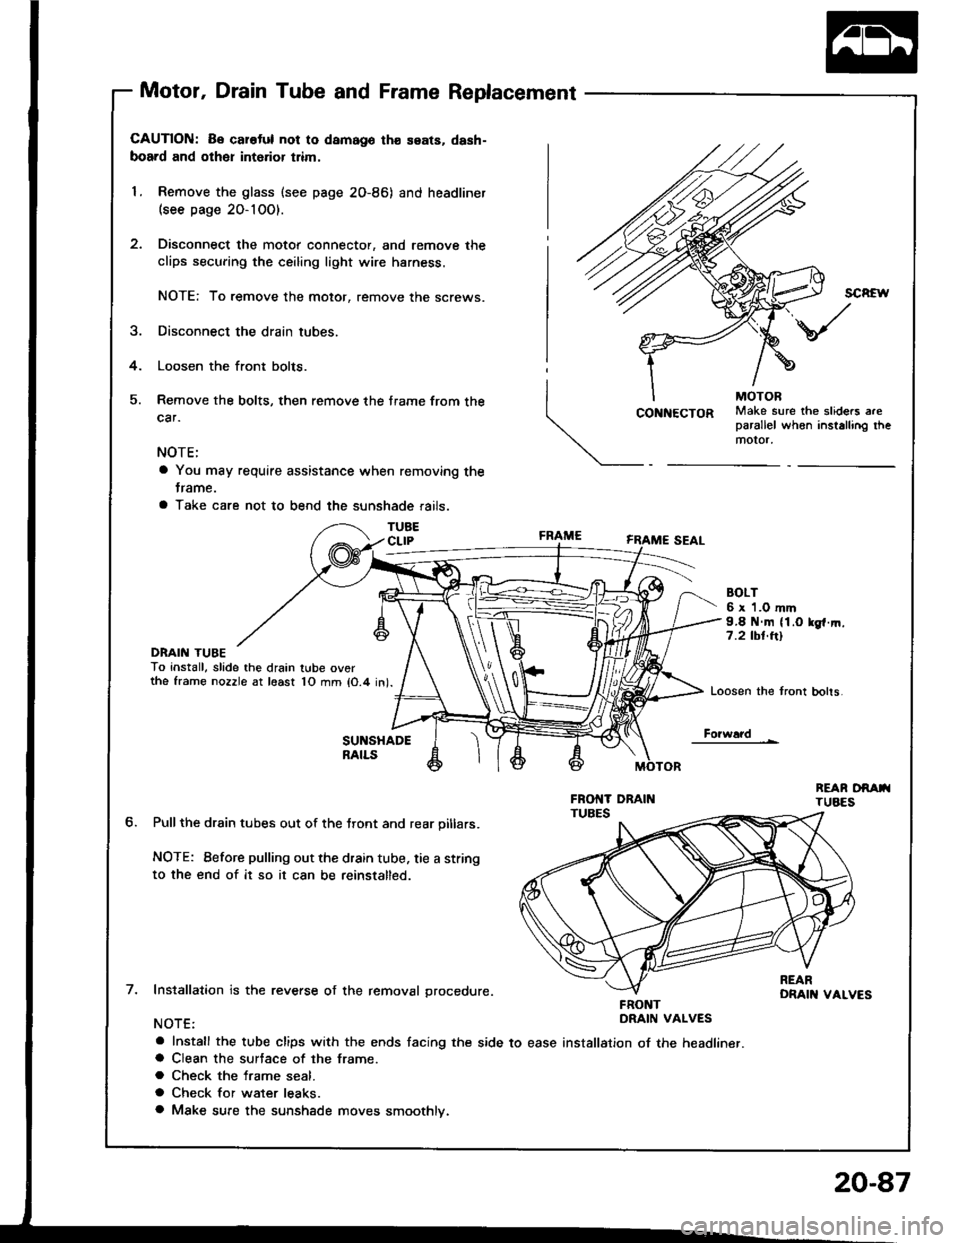 HONDA INTEGRA 1994 4.G Workshop Manual Motor, Drain Tube and Frame Replacement
CAUTION: Be carotul not to damago th€ seats, dash-
board and other int6rior trim,
1. Remove the glass (see page 2O-86) and headliner(see page 20-10O).
Disconn